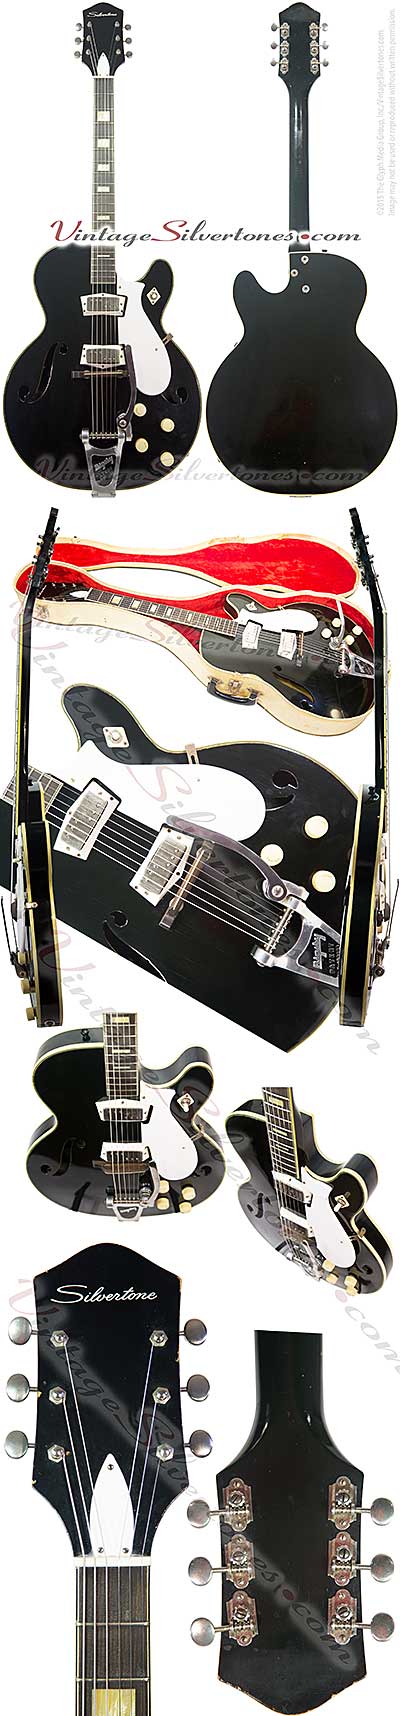 Silvertone 1446L made by Harmony of Chicago, two mini P90 pickups, electric guitar, semi-hollow body, black finish, white pickguard, made in 1965